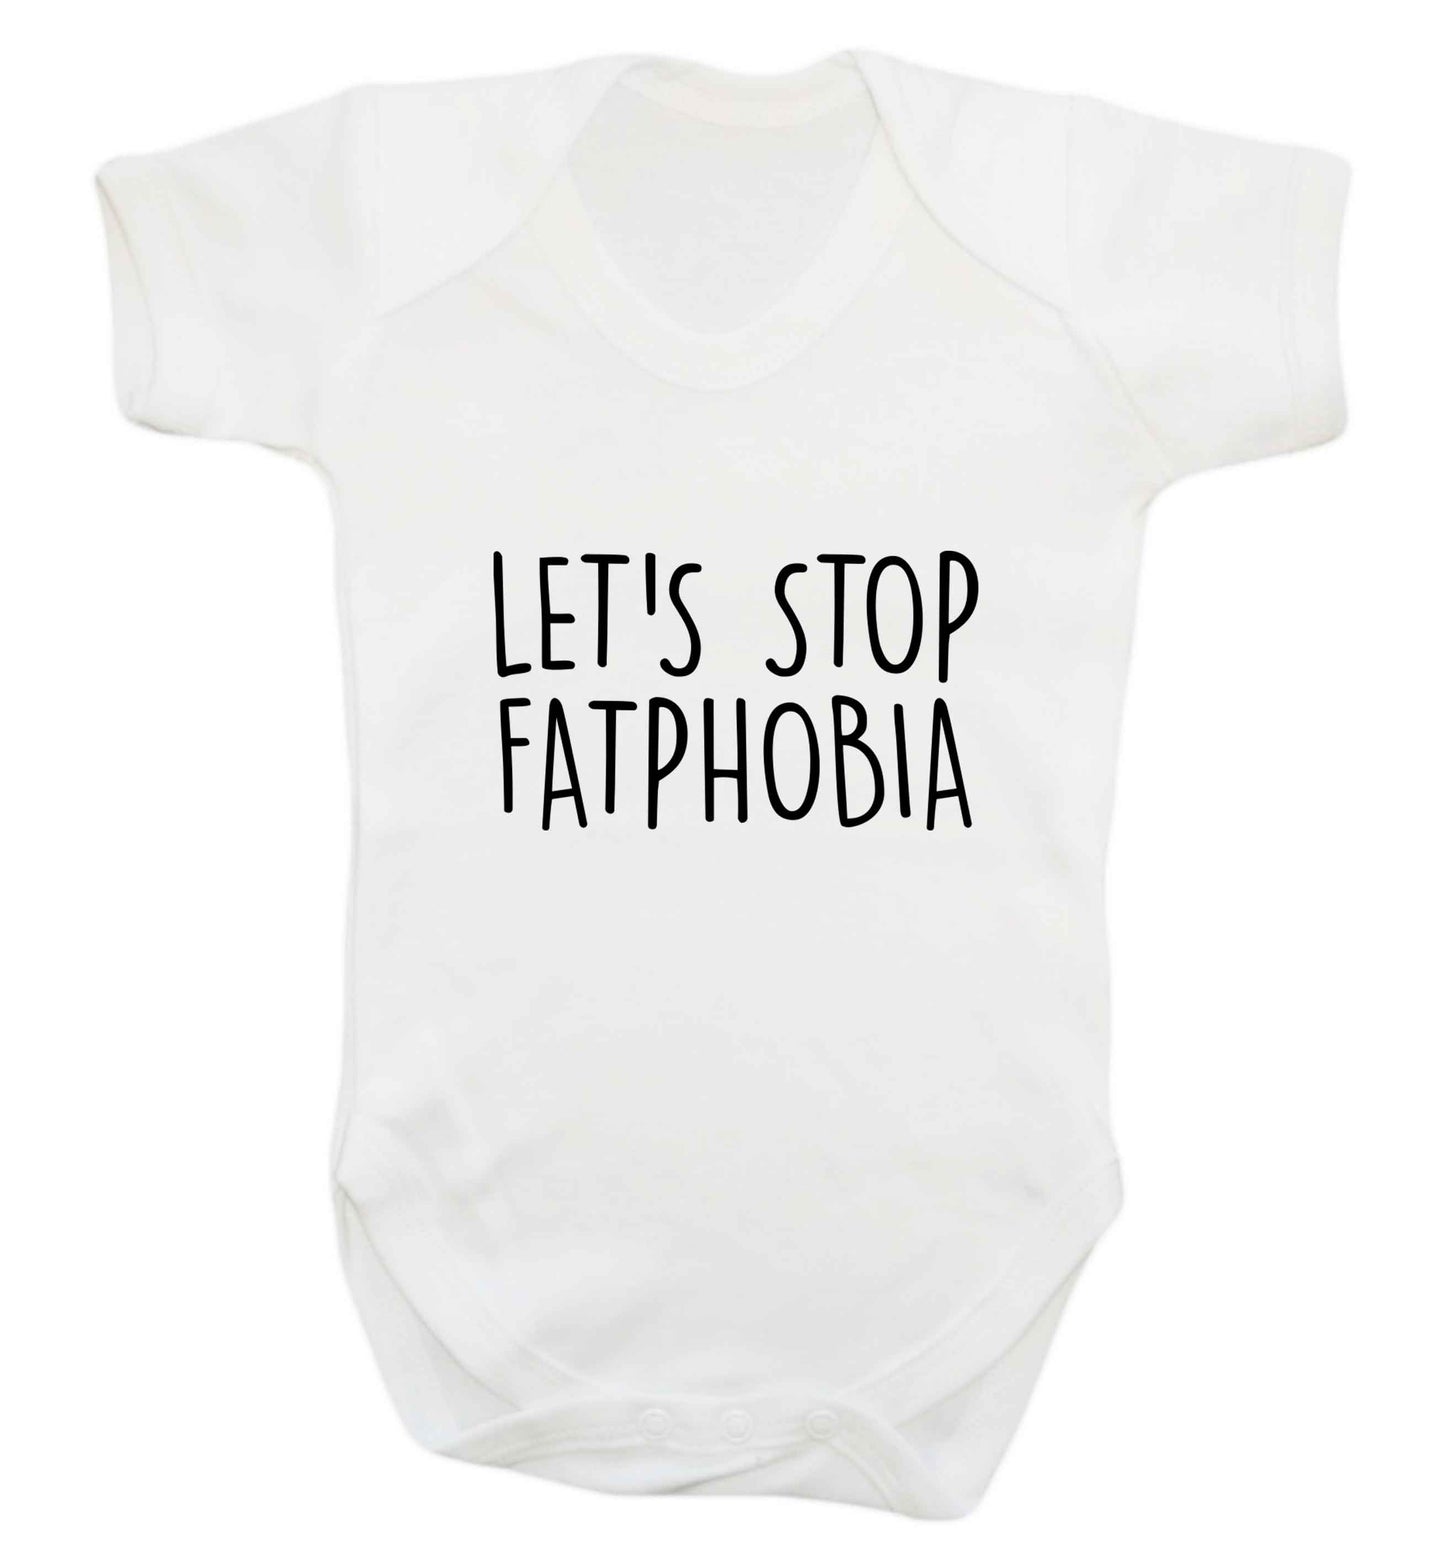 Let's stop fatphobia baby vest white 18-24 months